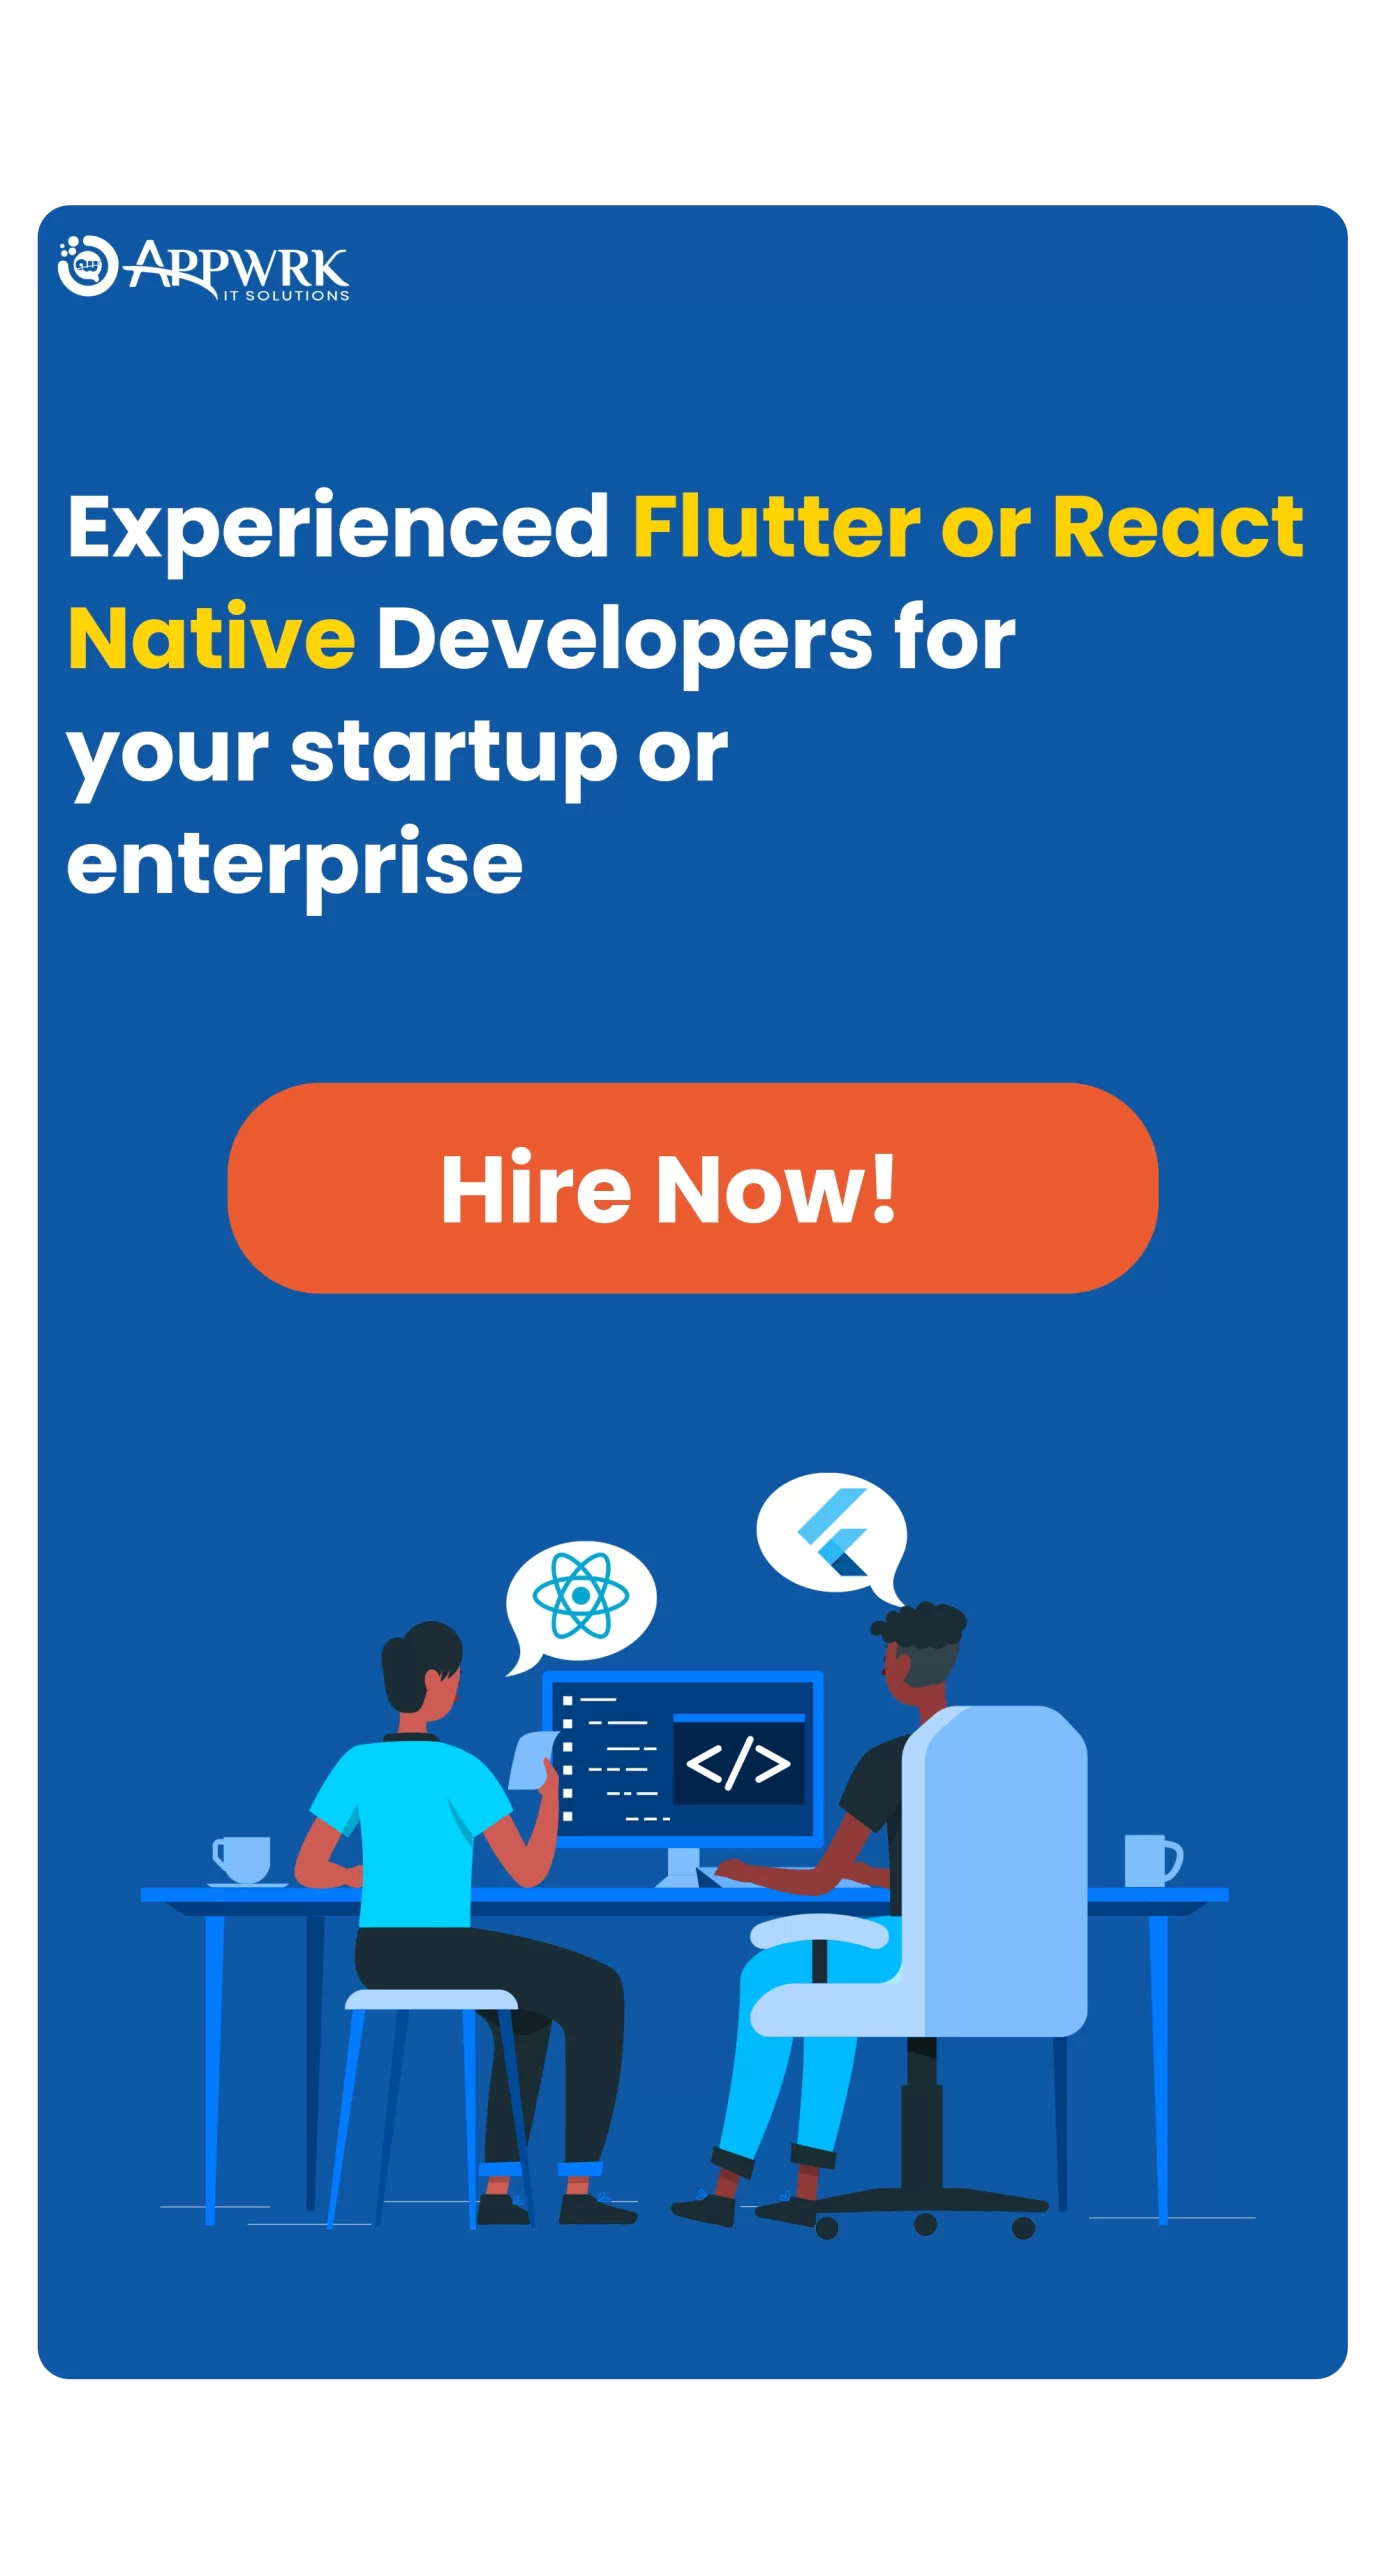 Experienced Flutter or React Native Developers for your startup or enterprise